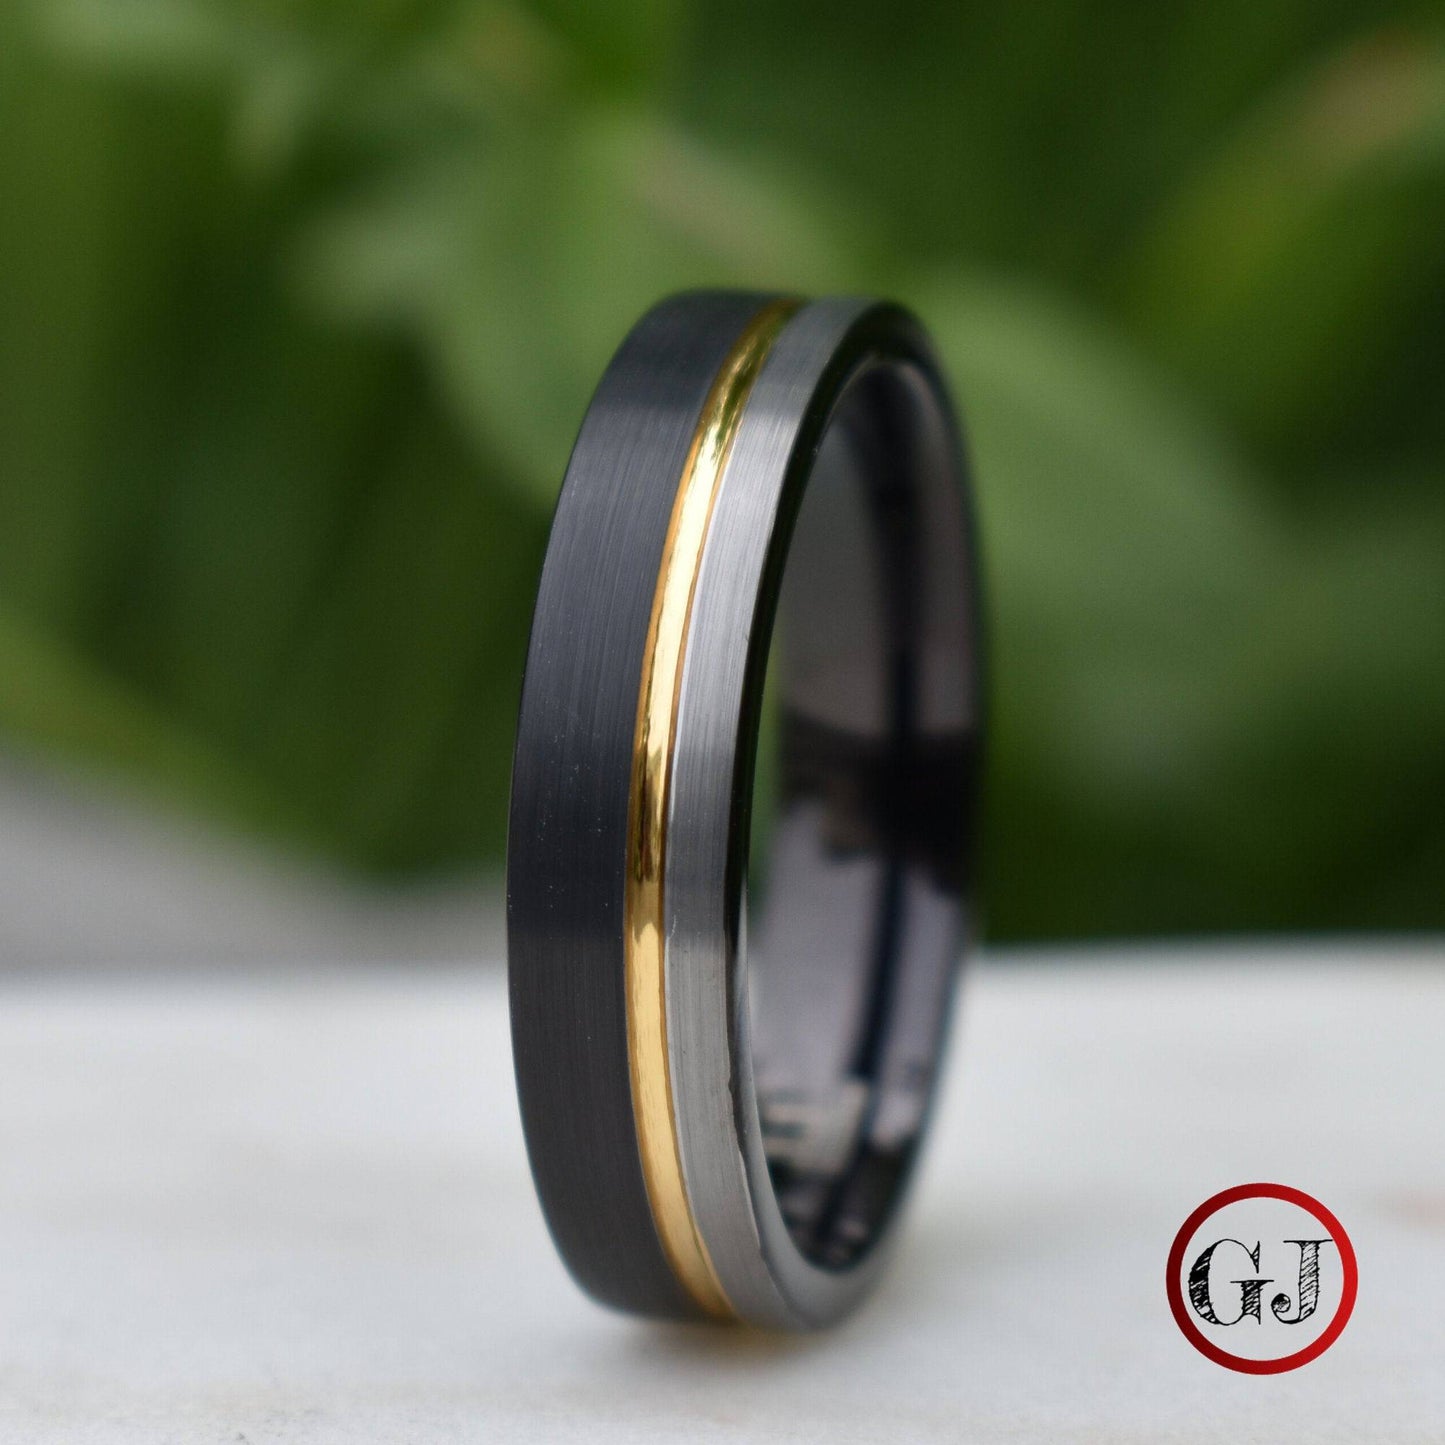 Tungsten 6mm Ring Black and Silver Brushed with Gold Accent - Tungsten Titans